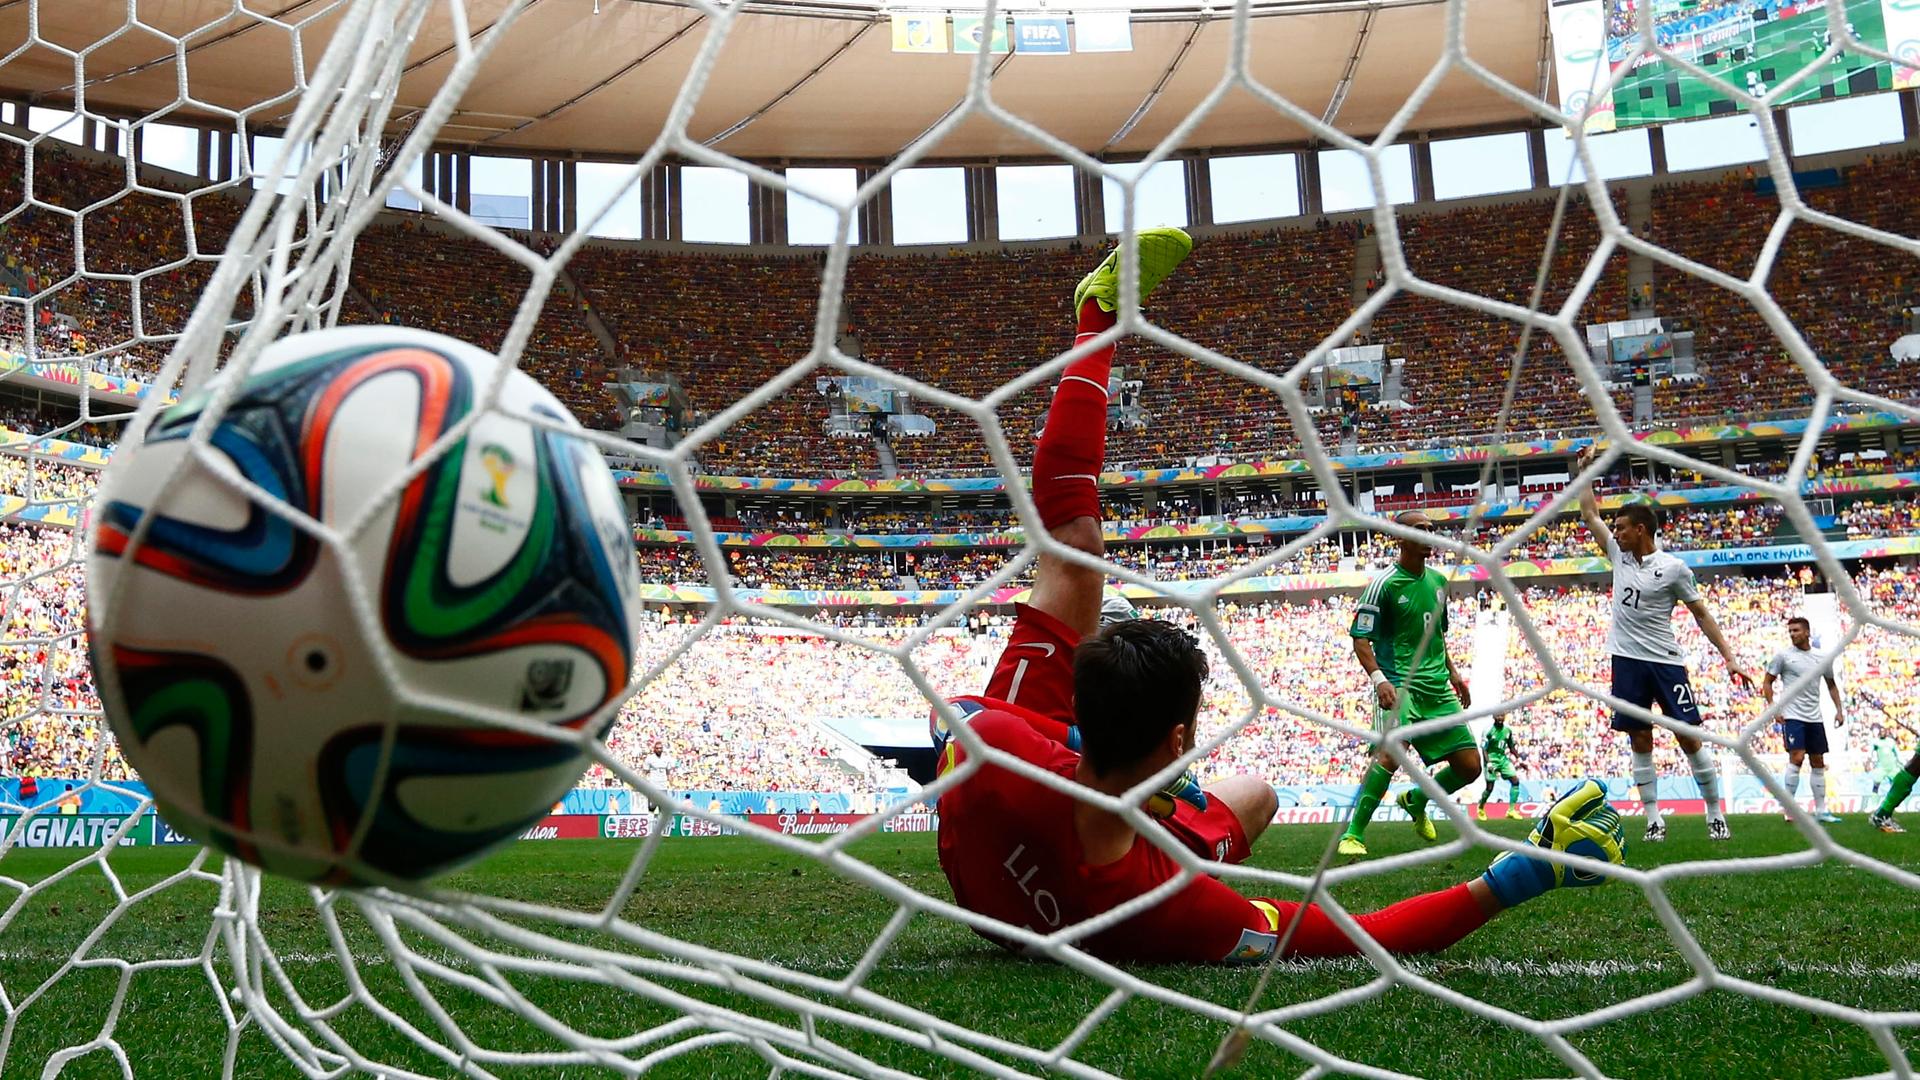 France's goalkeeper Hugo Lloris fails to stop a goal shot by Nigeria's Emmanuel Emenike, which was later disallowed, during their 2014 World Cup round of 16 game at the Brasilia national stadium in Brasilia June 30, 2014.